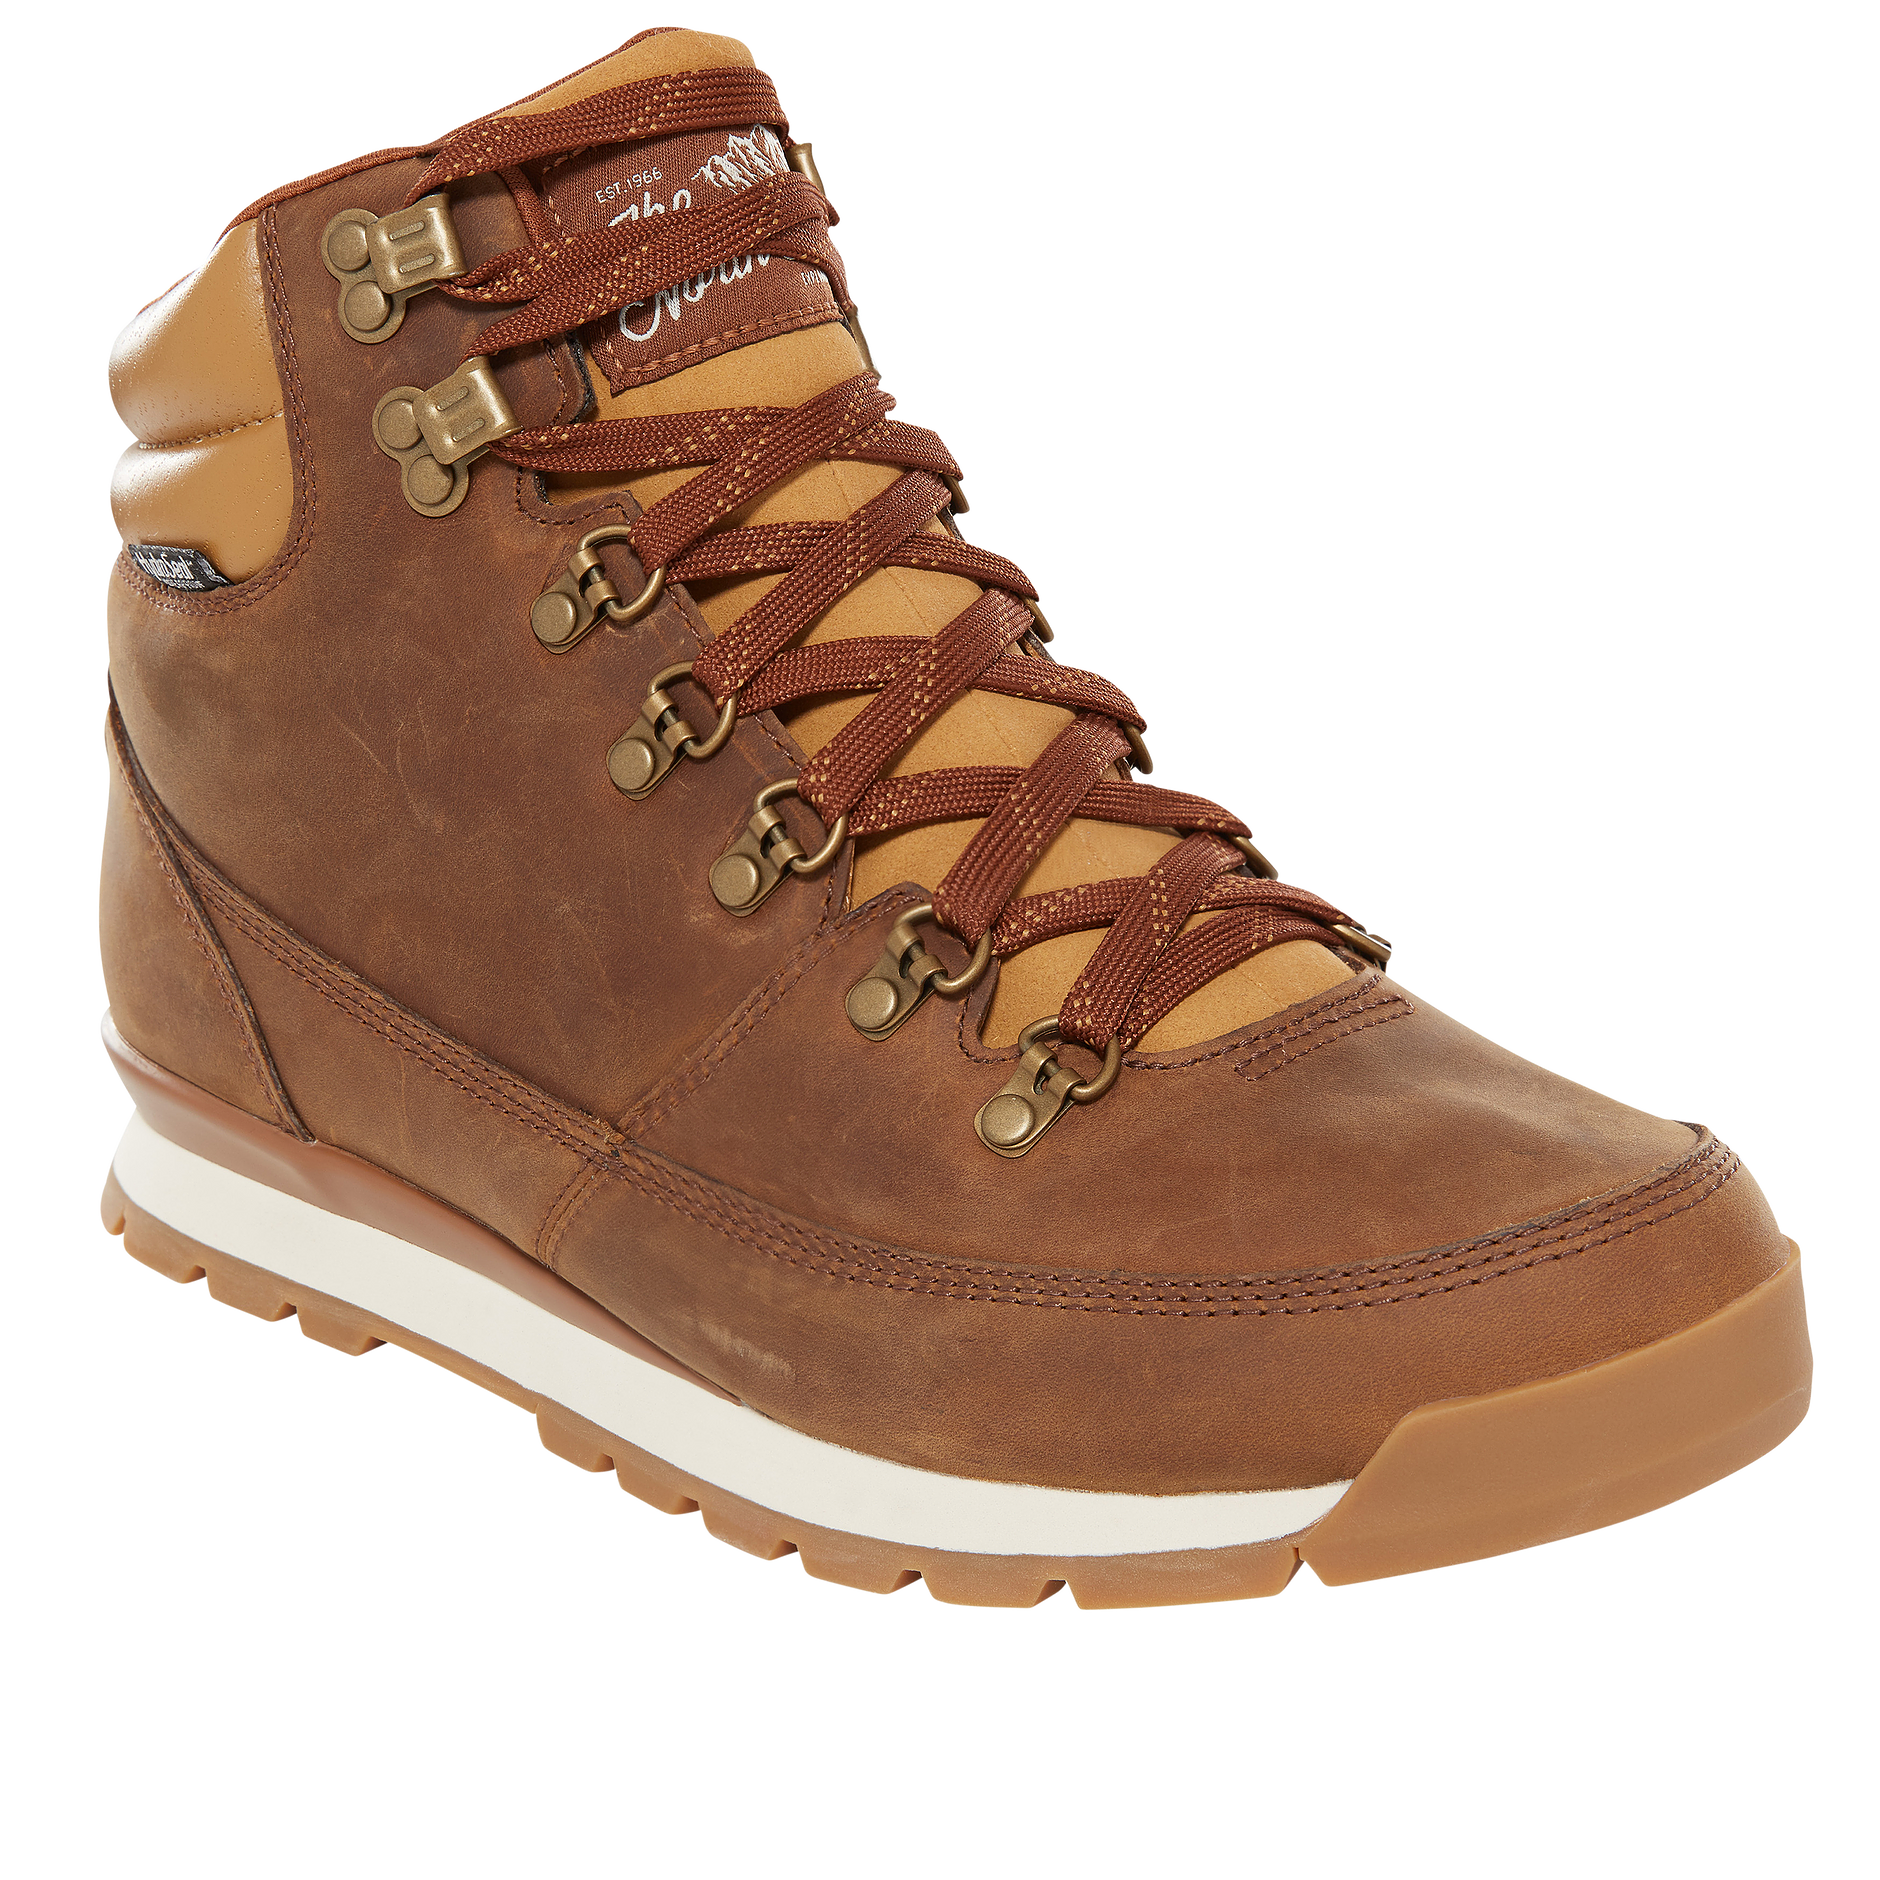 Men’s Back-to-Berkeley Redux Leather Boots